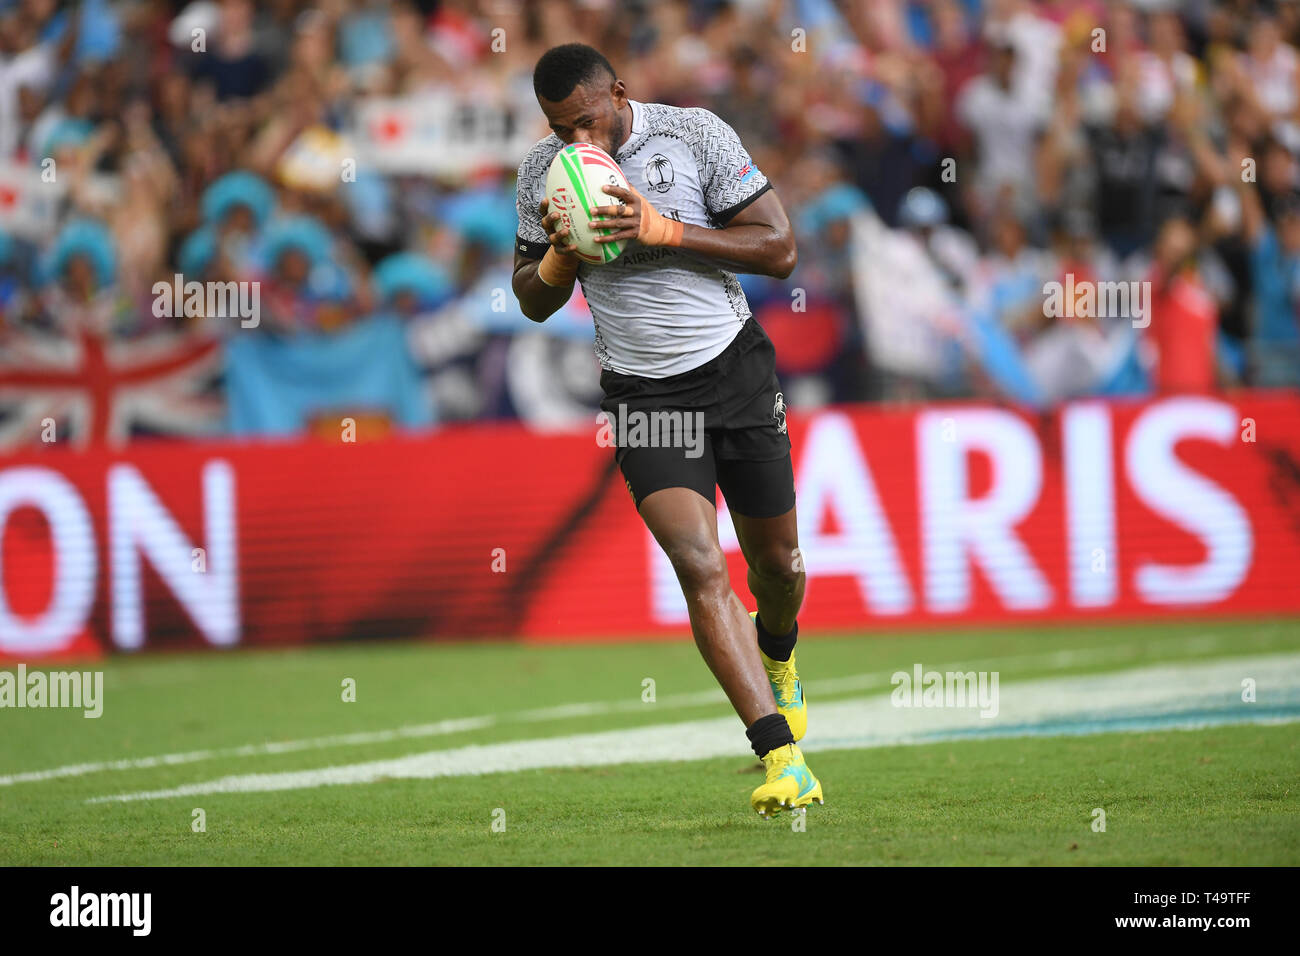 Sevuloni Mocenacagi(FJI), APR 14, 2019 - in action during Cup SF2 HSBC Singapore Rugby 7s 2019 Credit Haruhiko Otsuka/AFLO/Alamy Live News Stock Photo